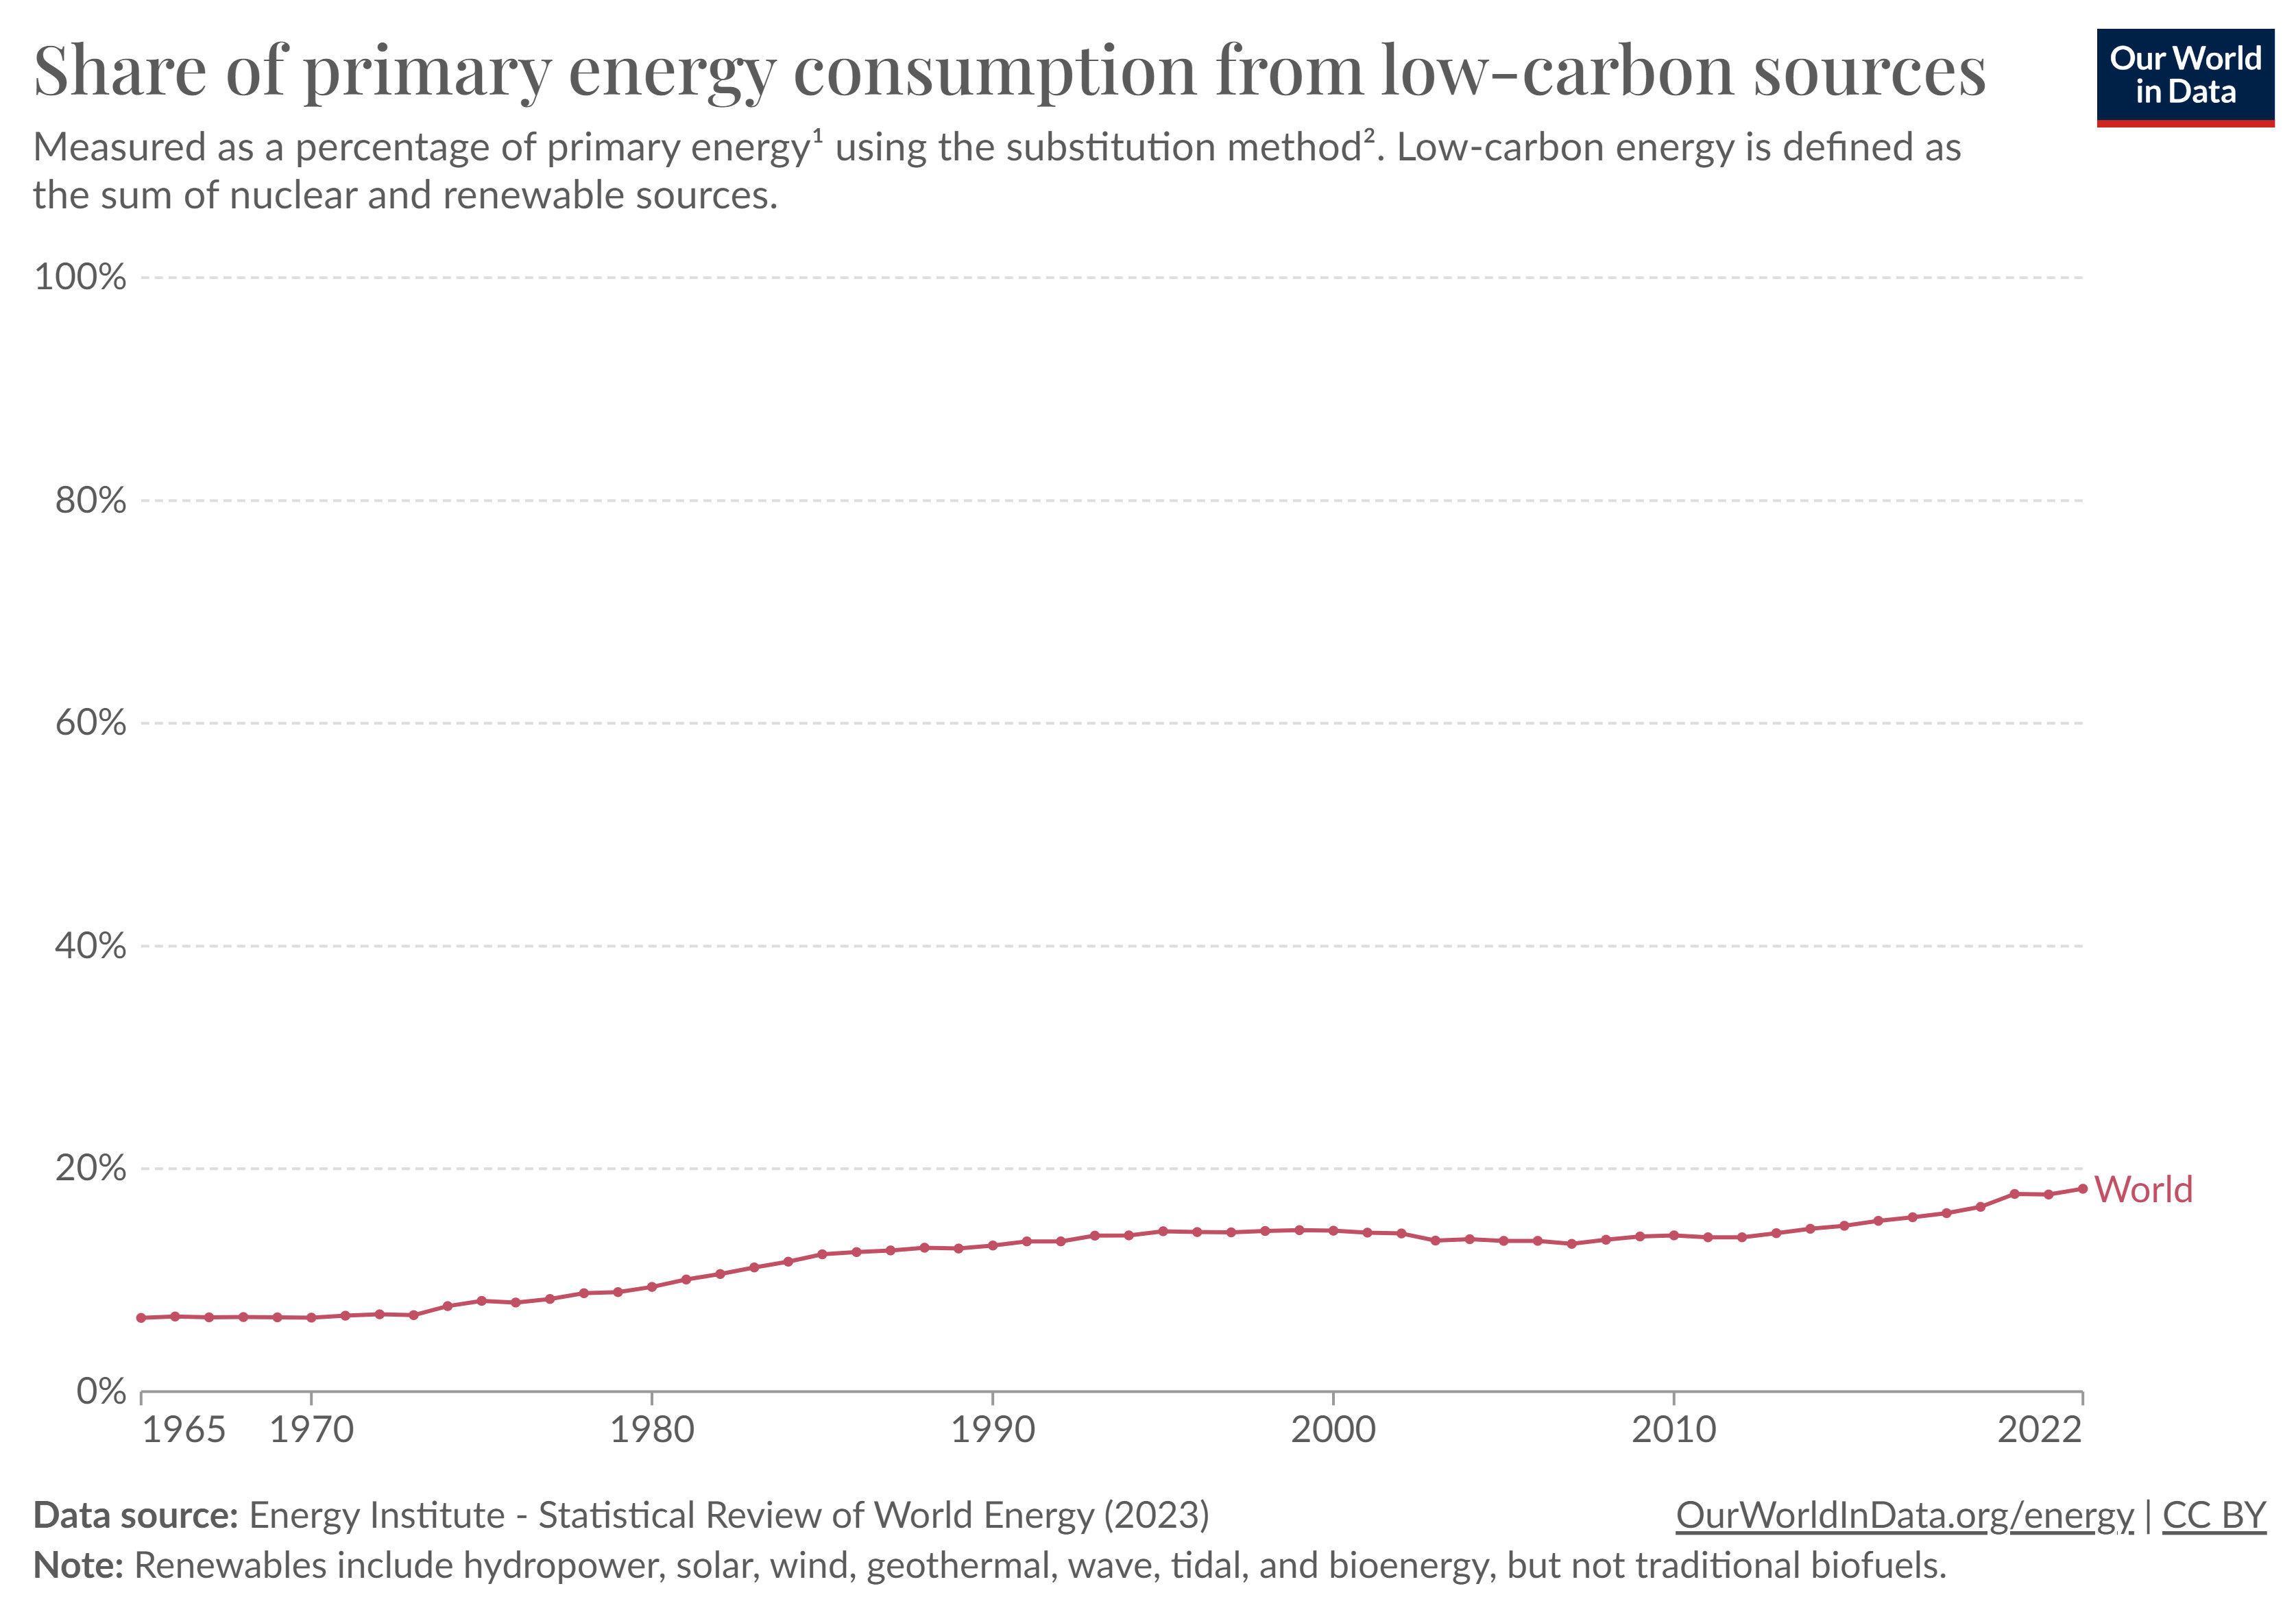 Share of primary energy from low-carbon sources